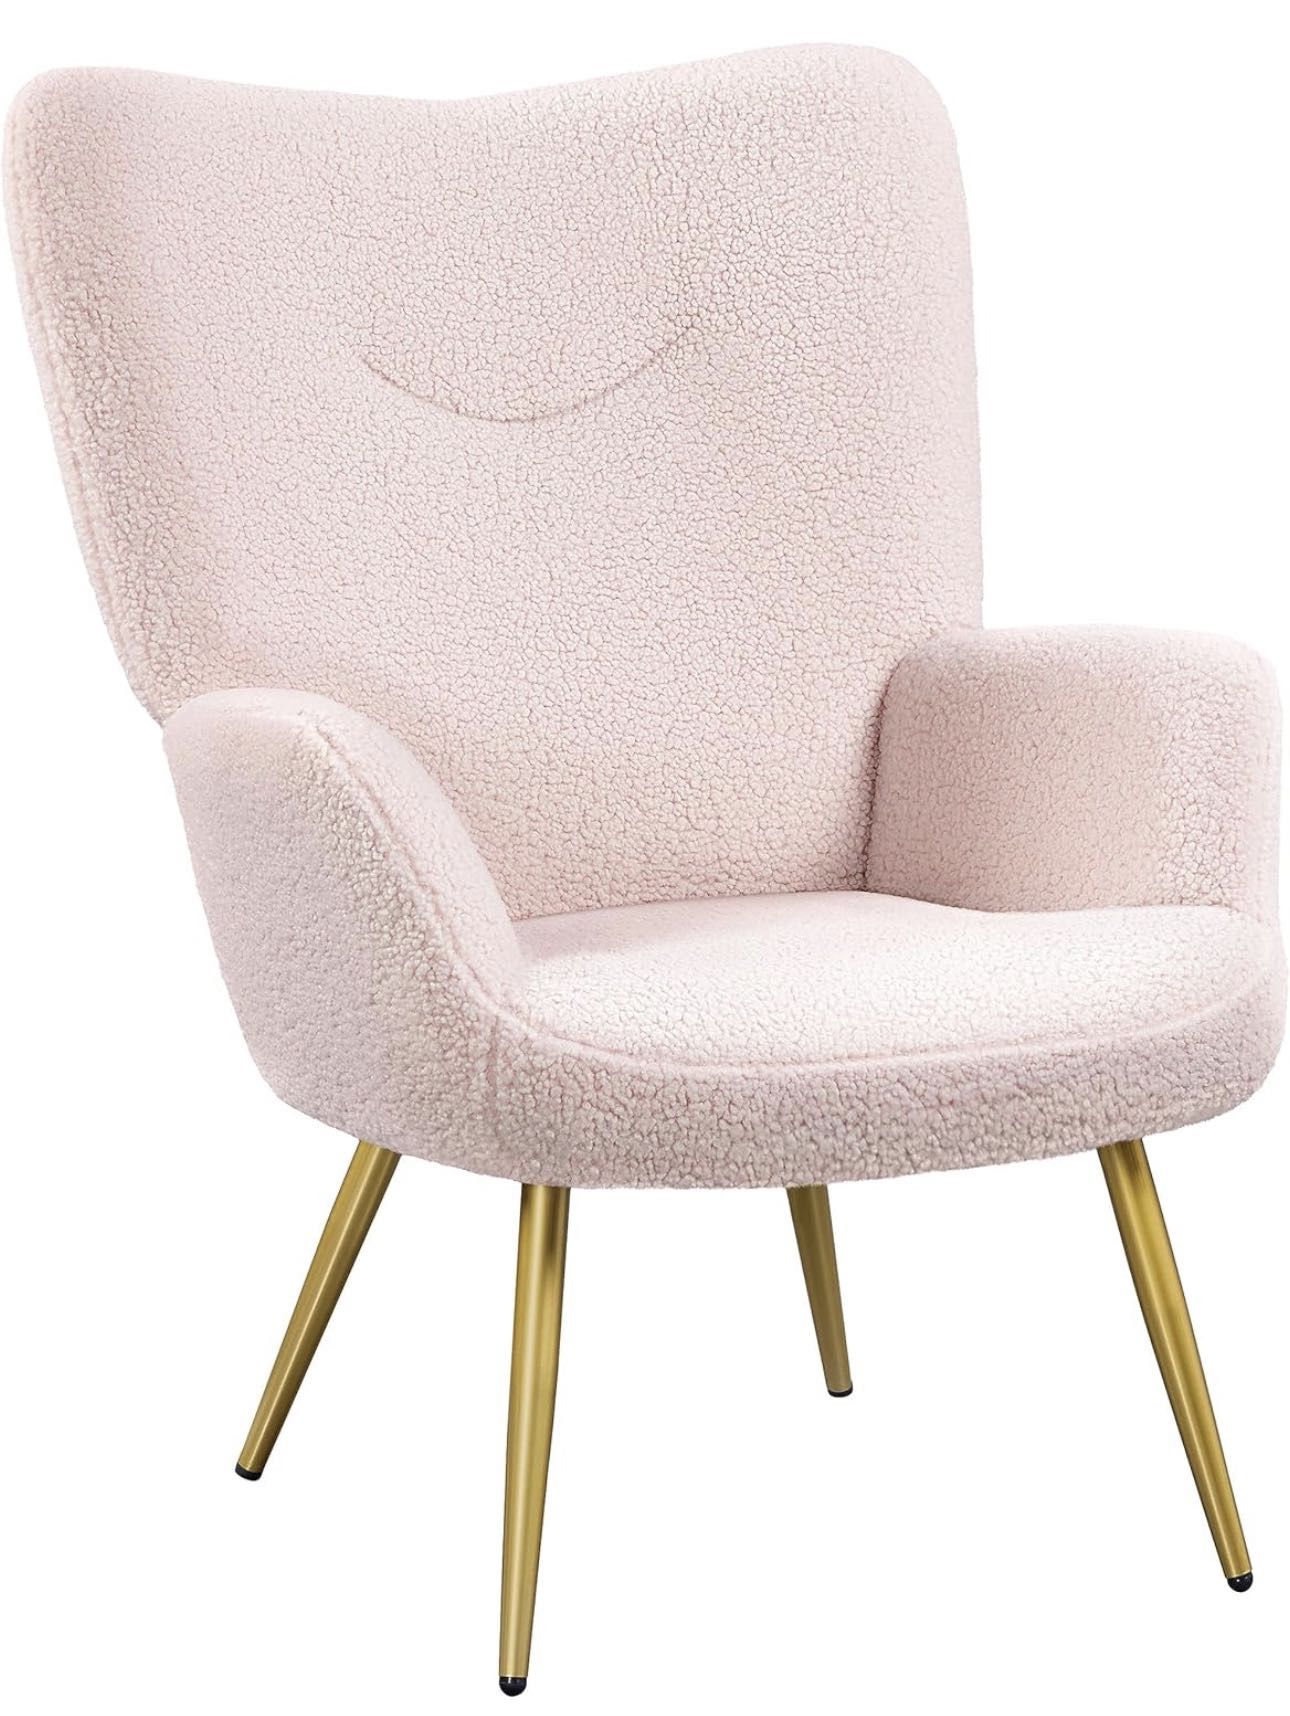 Modern Vanity Chair, Boucle Fabric Accent Chair, Sherpa Furry Armchair with High Back and Soft Padded, Fuzzy Casual Chair for Living Room Bedroom, Pin